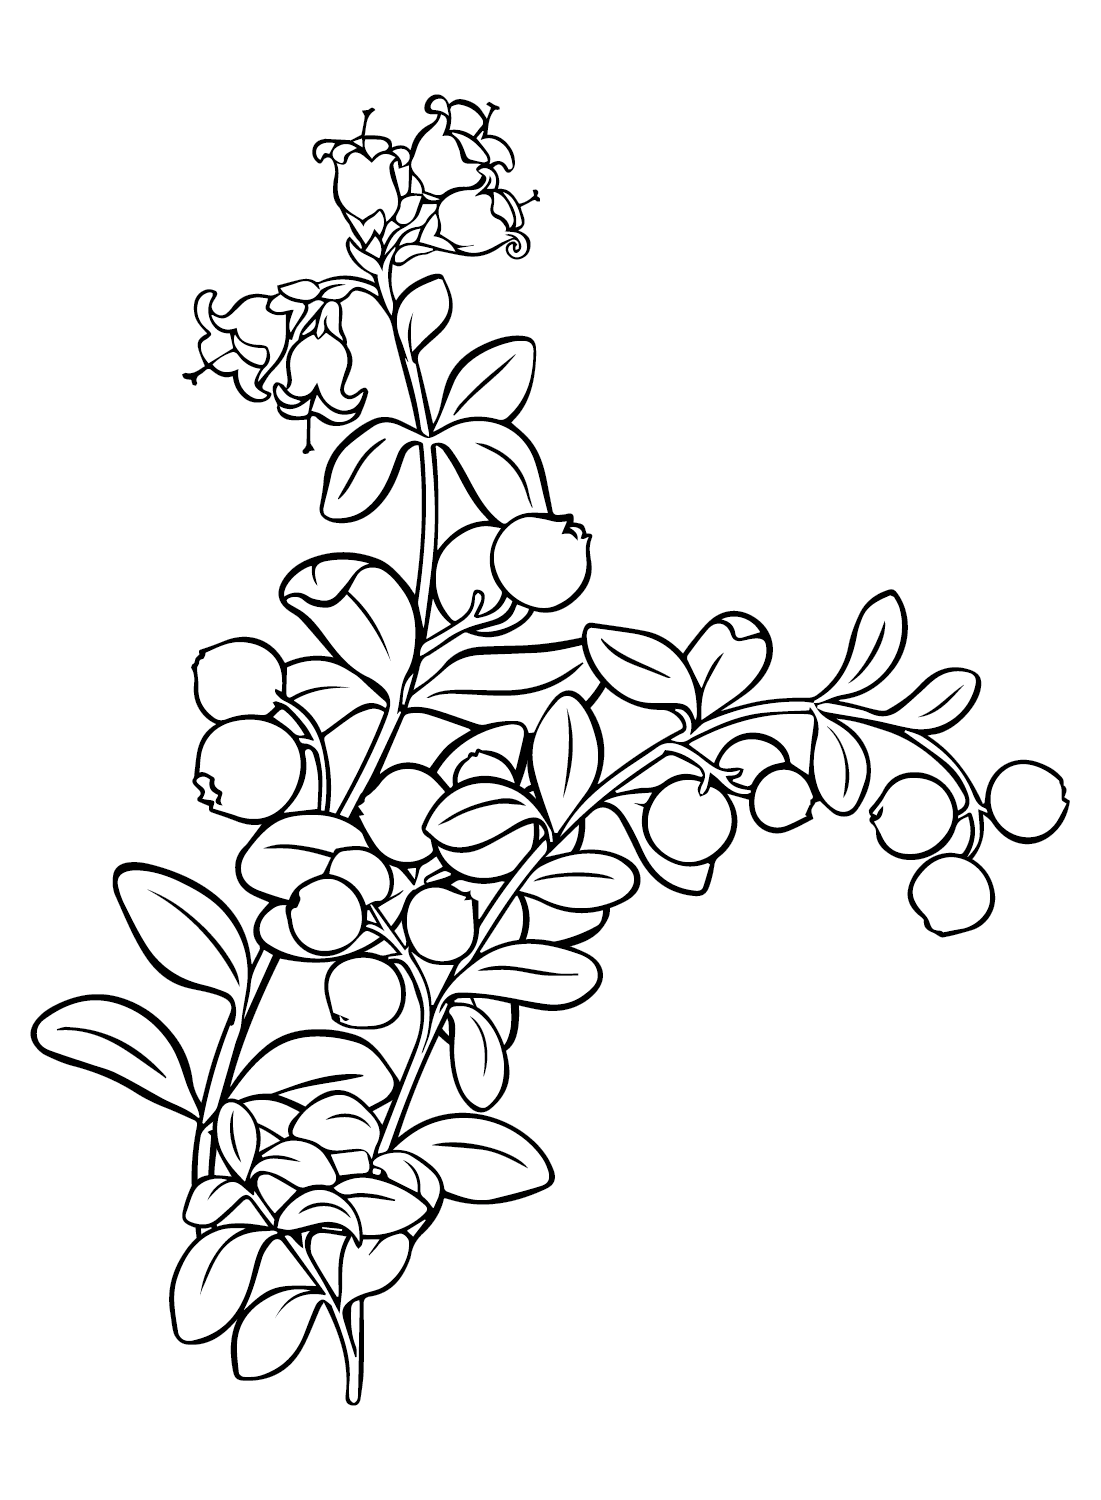 Cranberry Branch Coloring Page